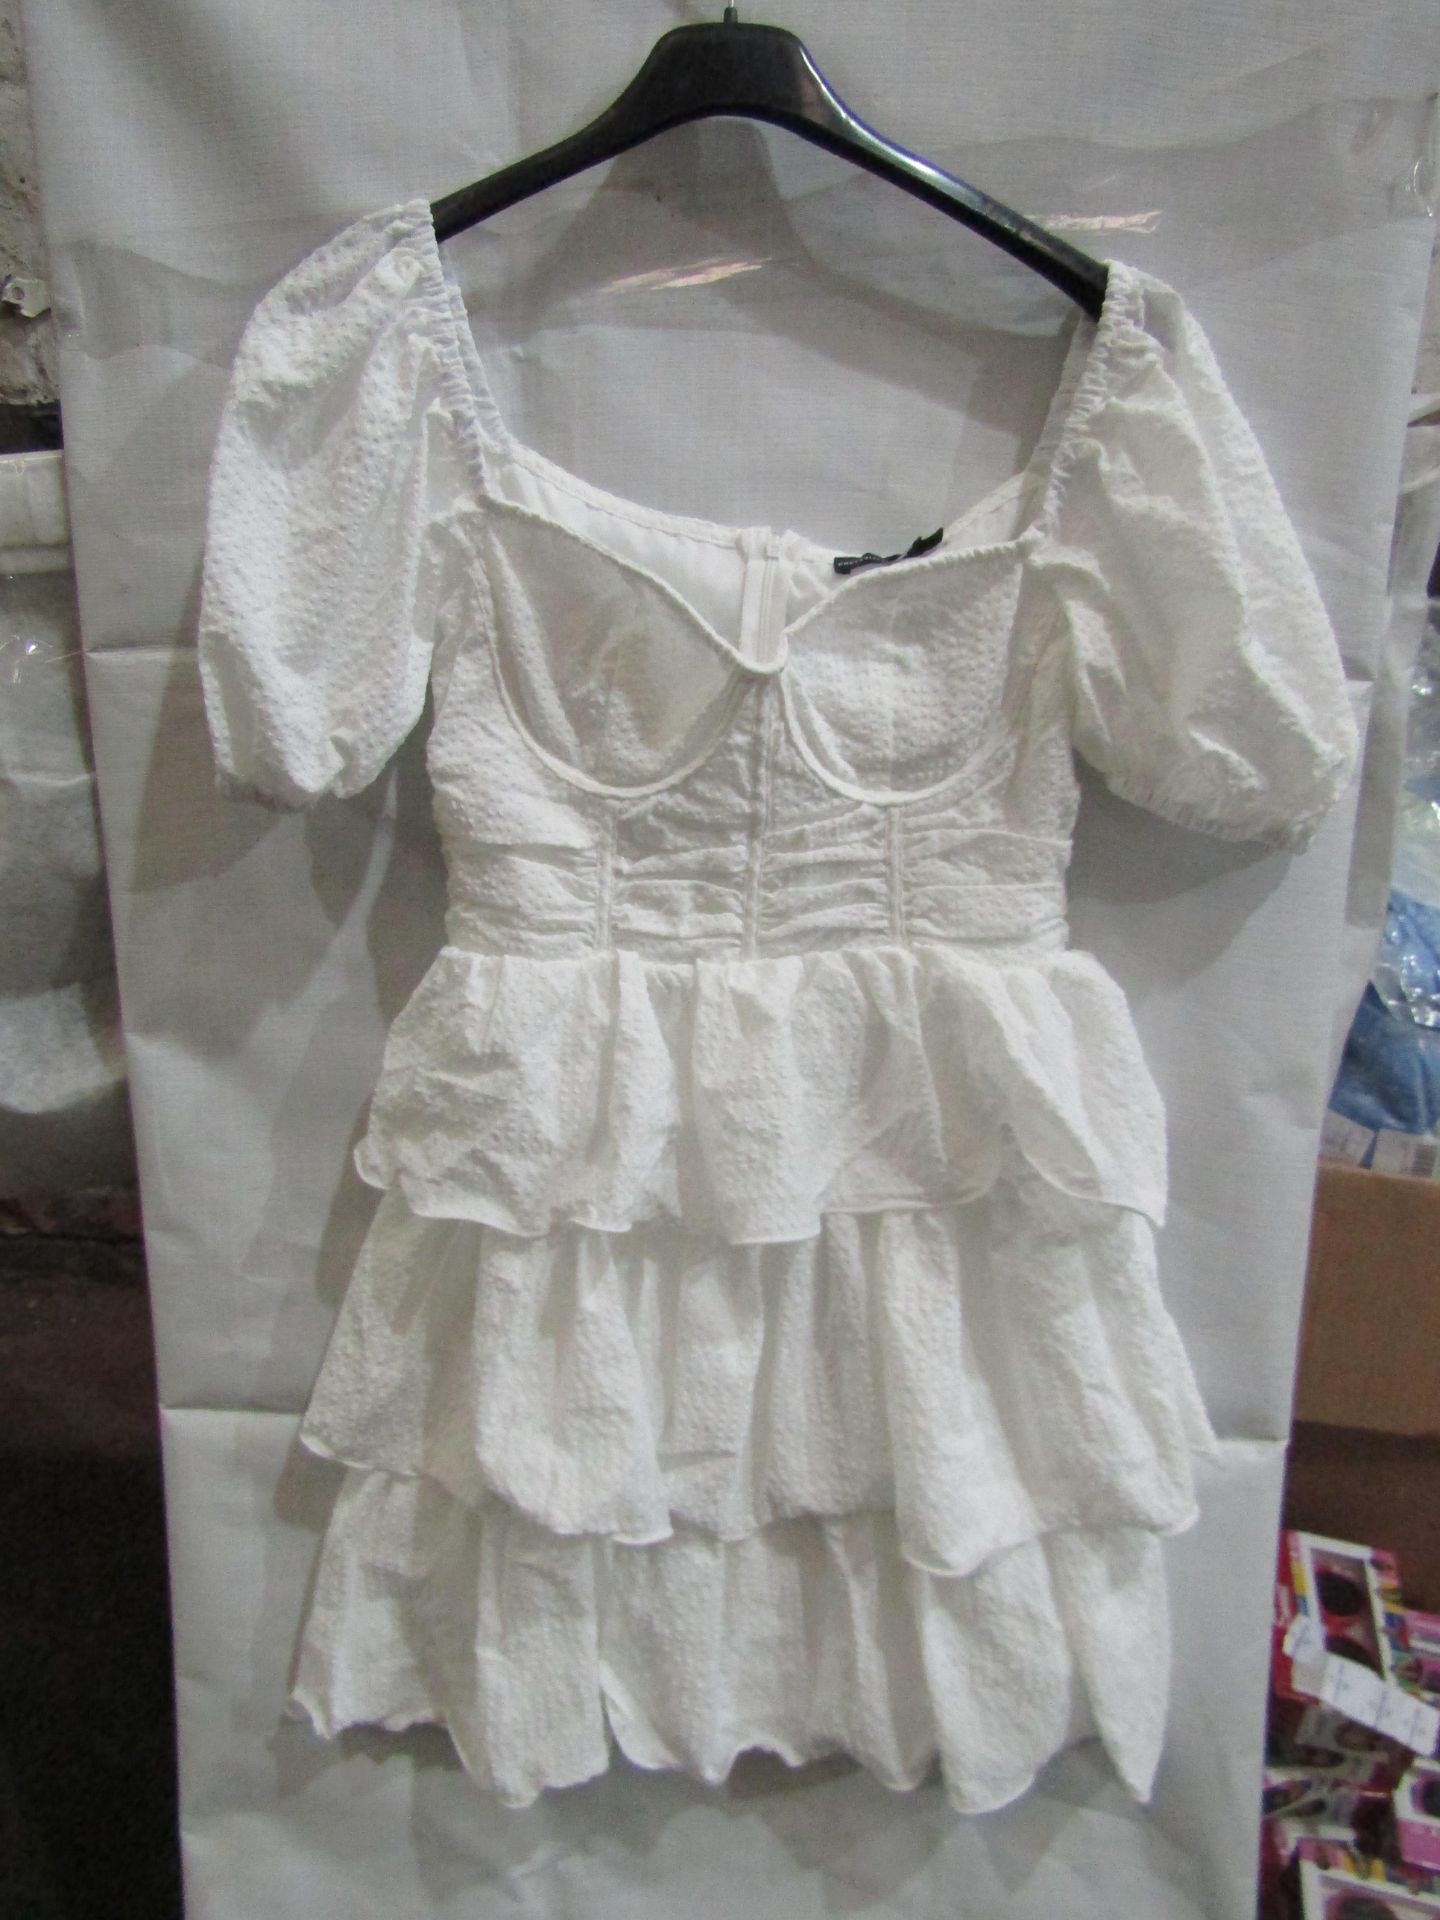 5x Pretty Little Thing White Crinkle Cup Detail Tiered Skirt Scatter Dress, Size 8, New & Packaged.